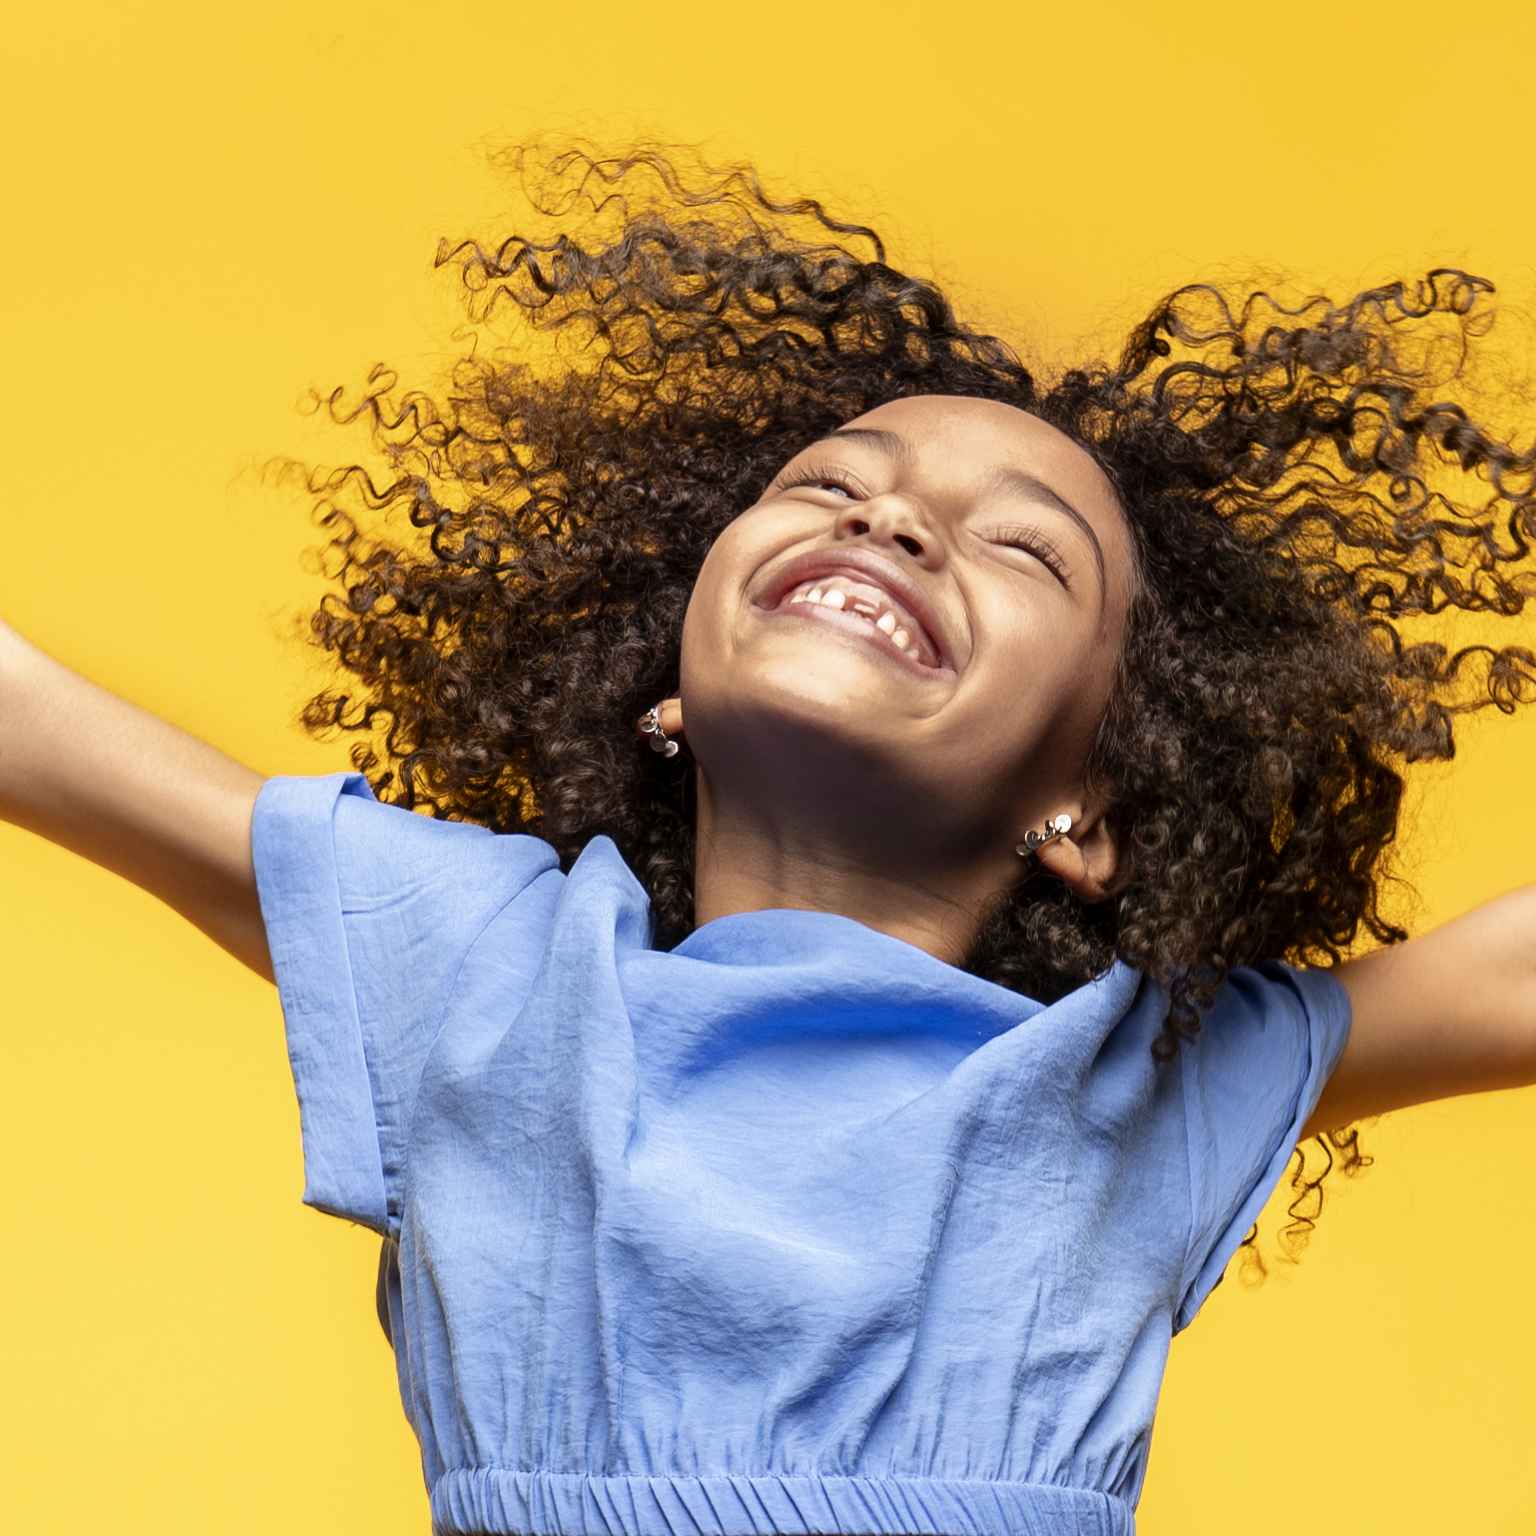 A child jumps for joy with outstretched arms and a happy smile